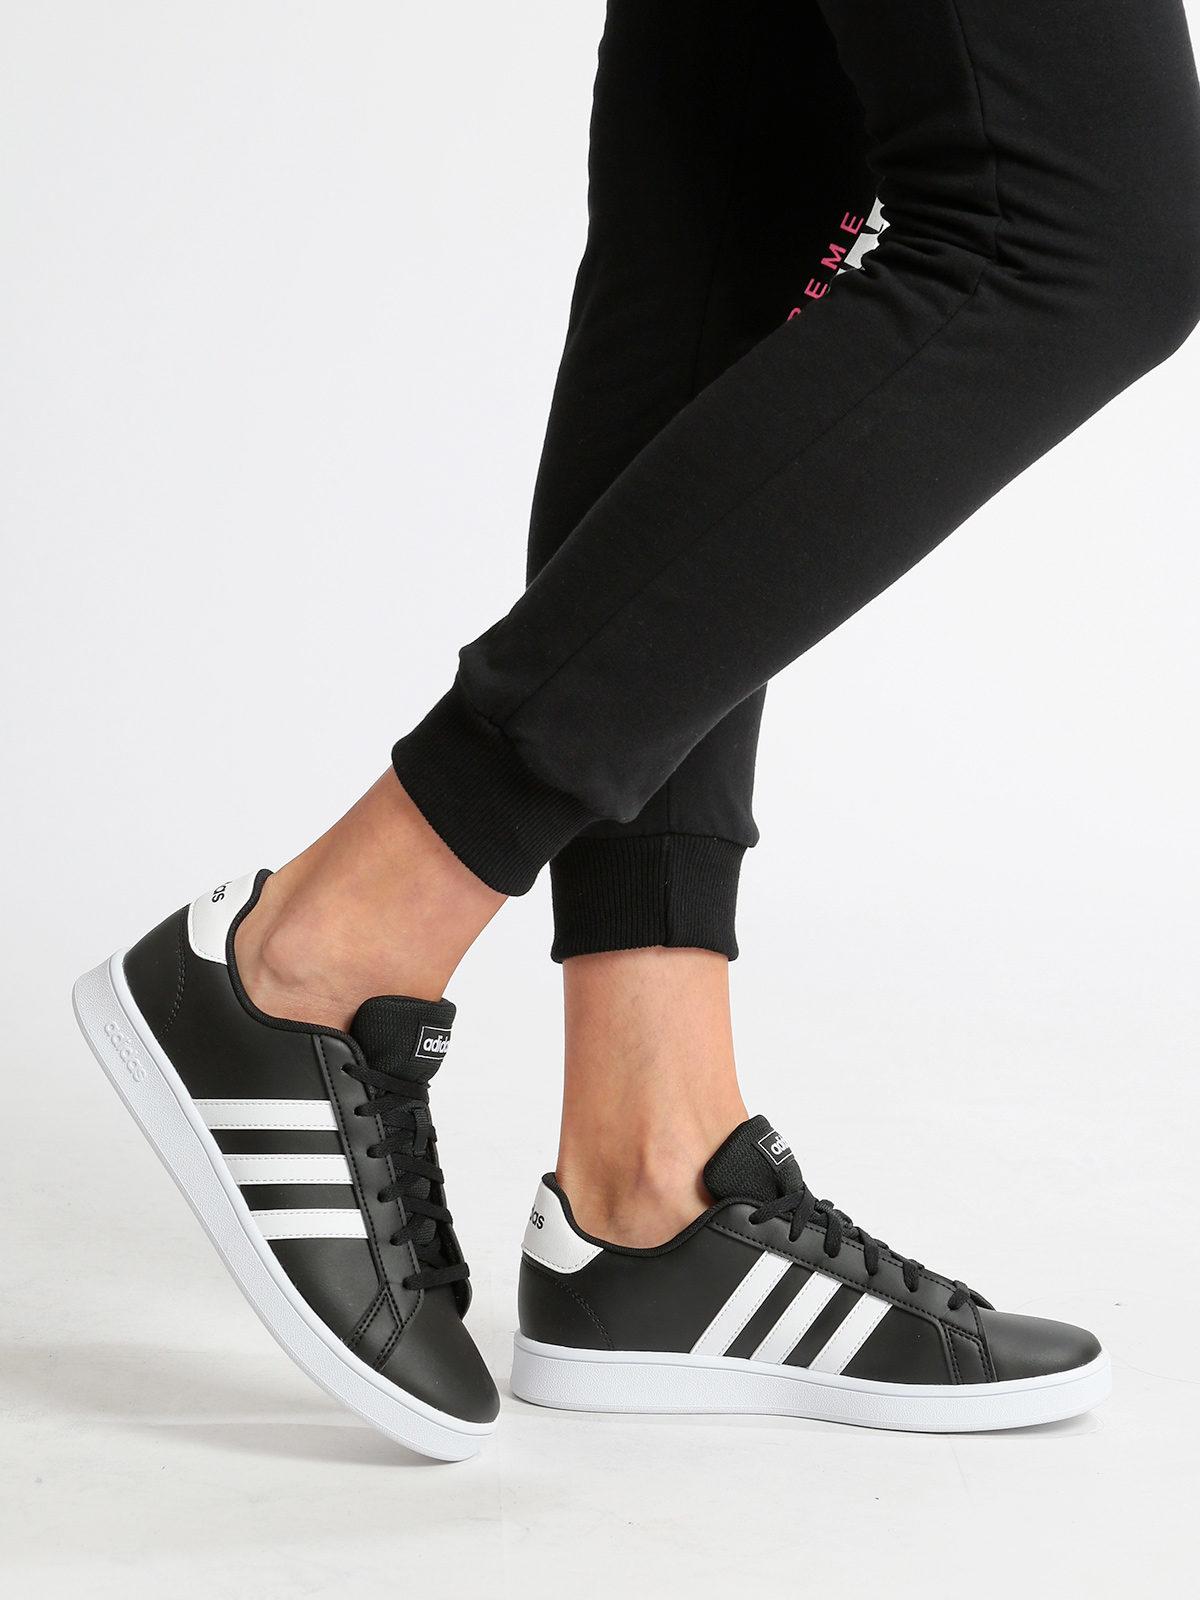 Adidas Grand court k - sneakers: in offerta a 39.9€ su Mecshopping.it